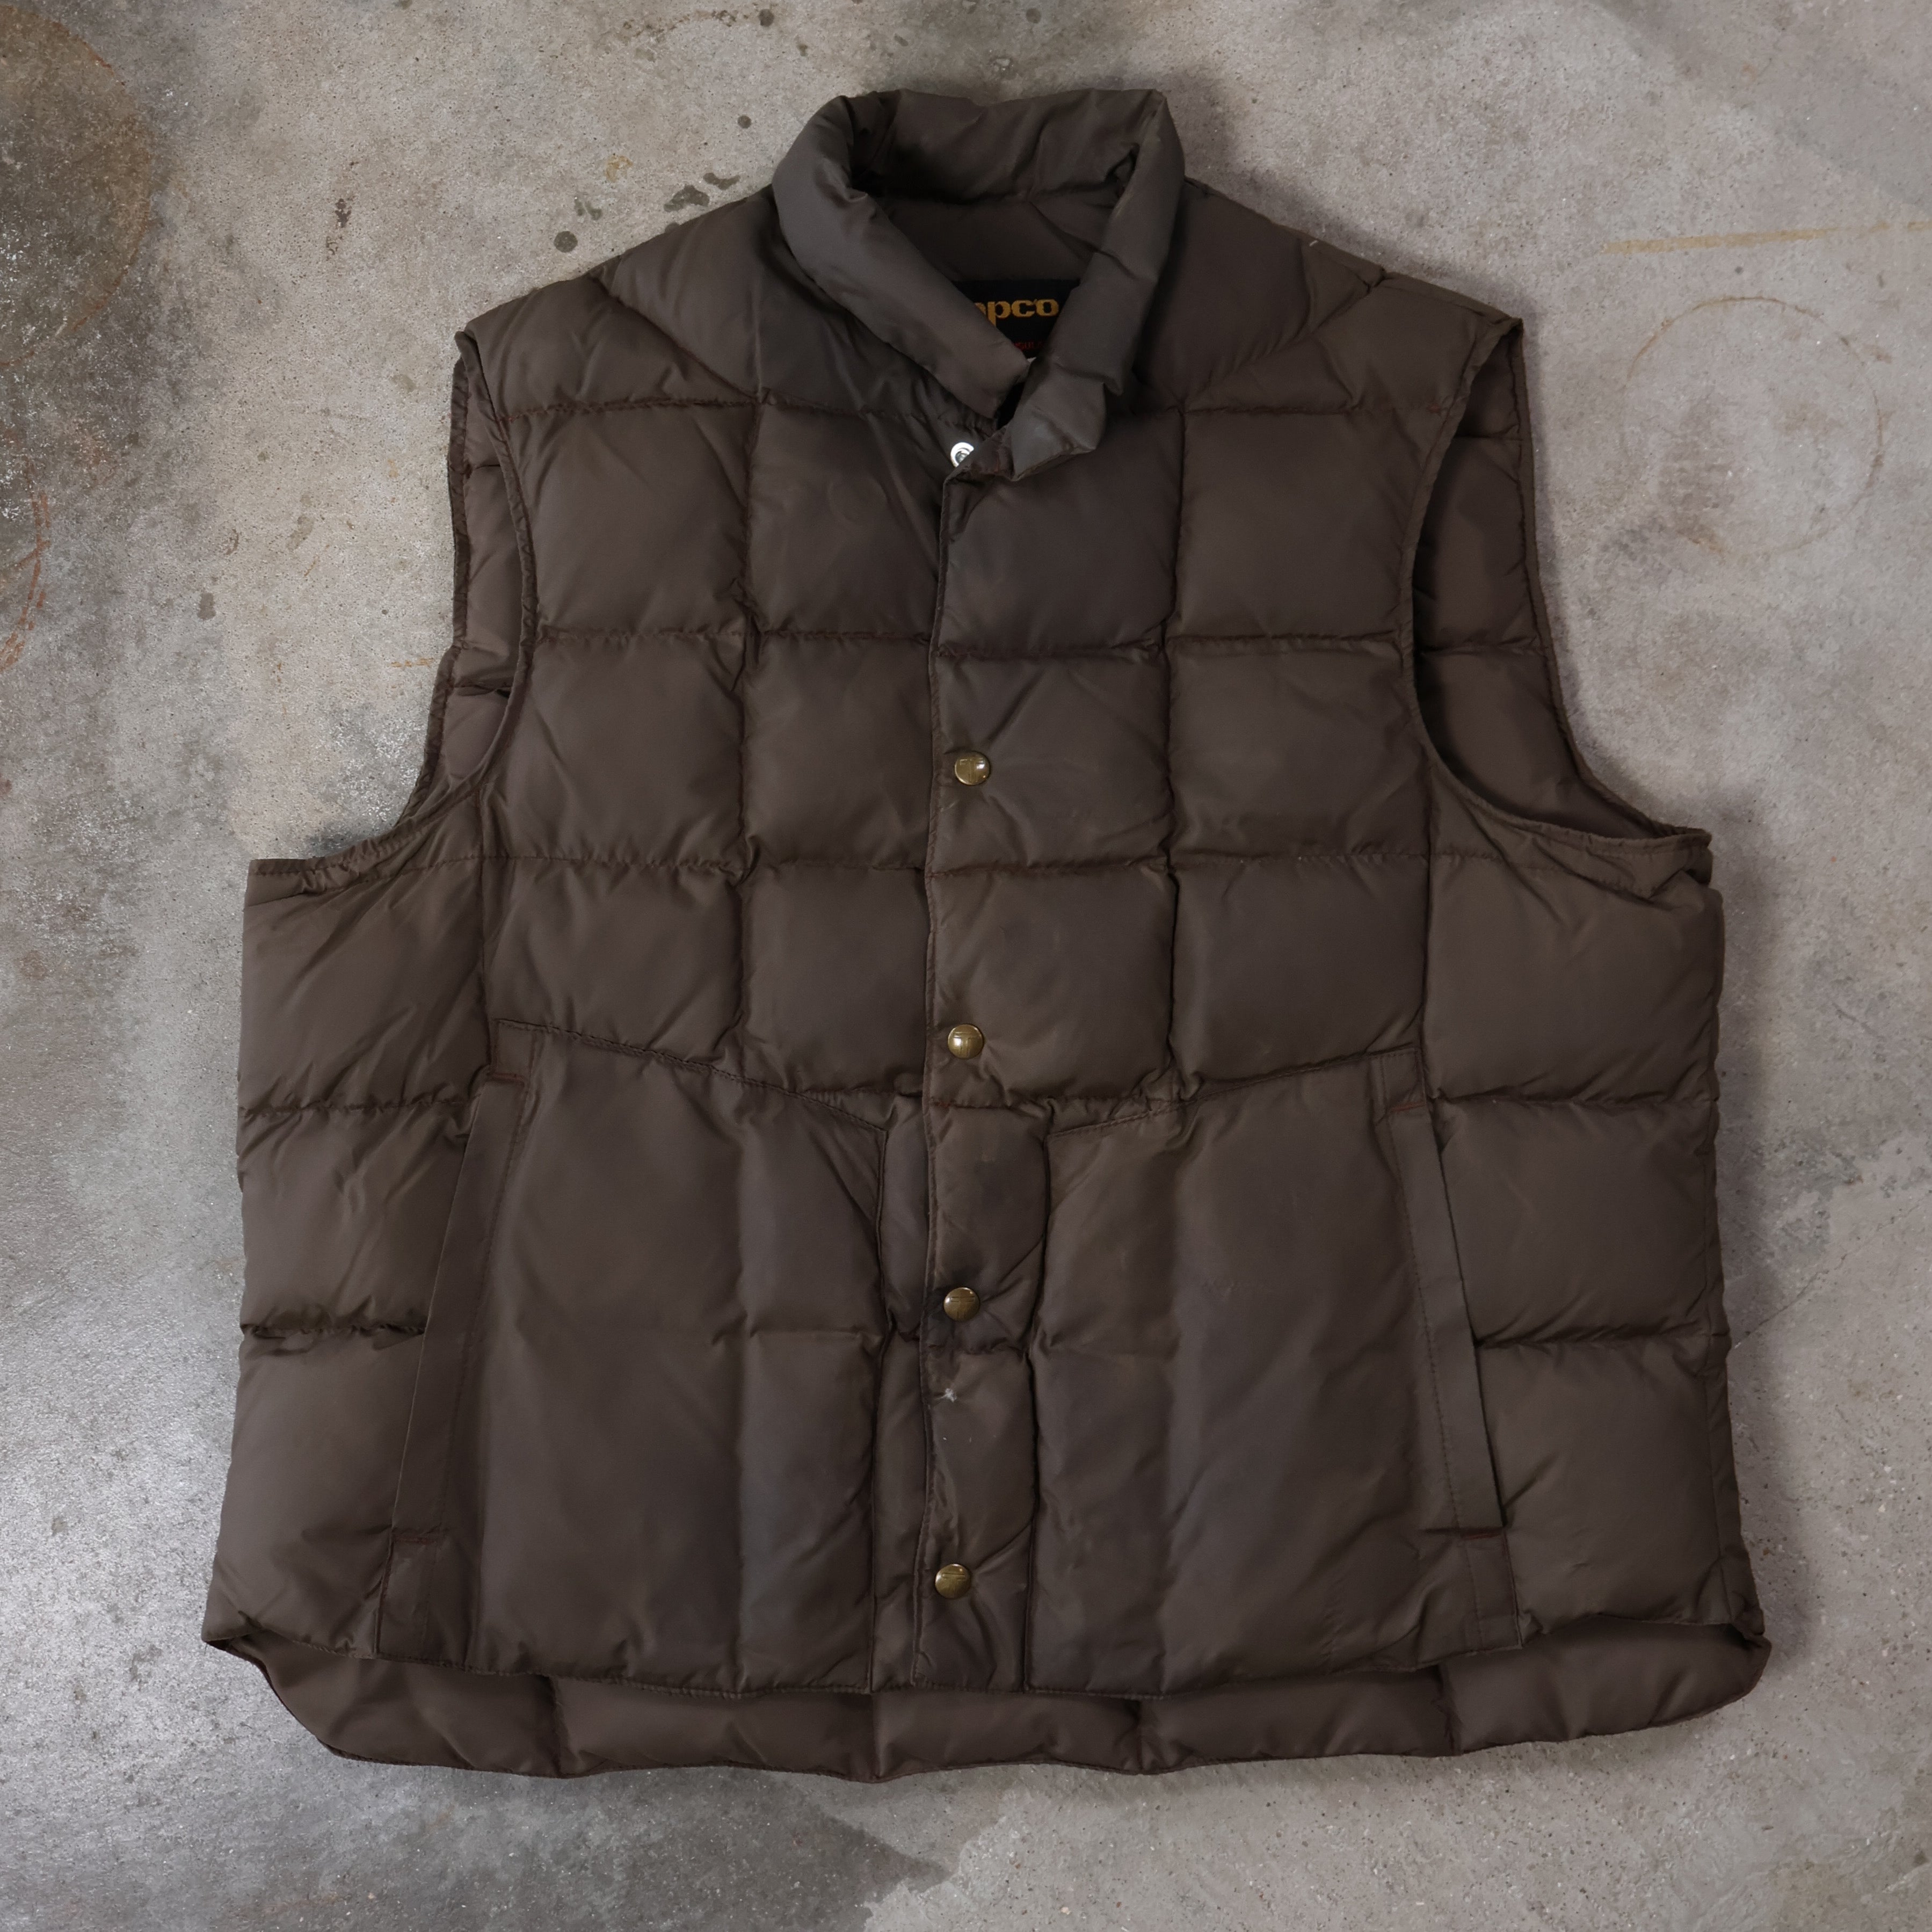 Brown Puffer Vest 90s (Large)